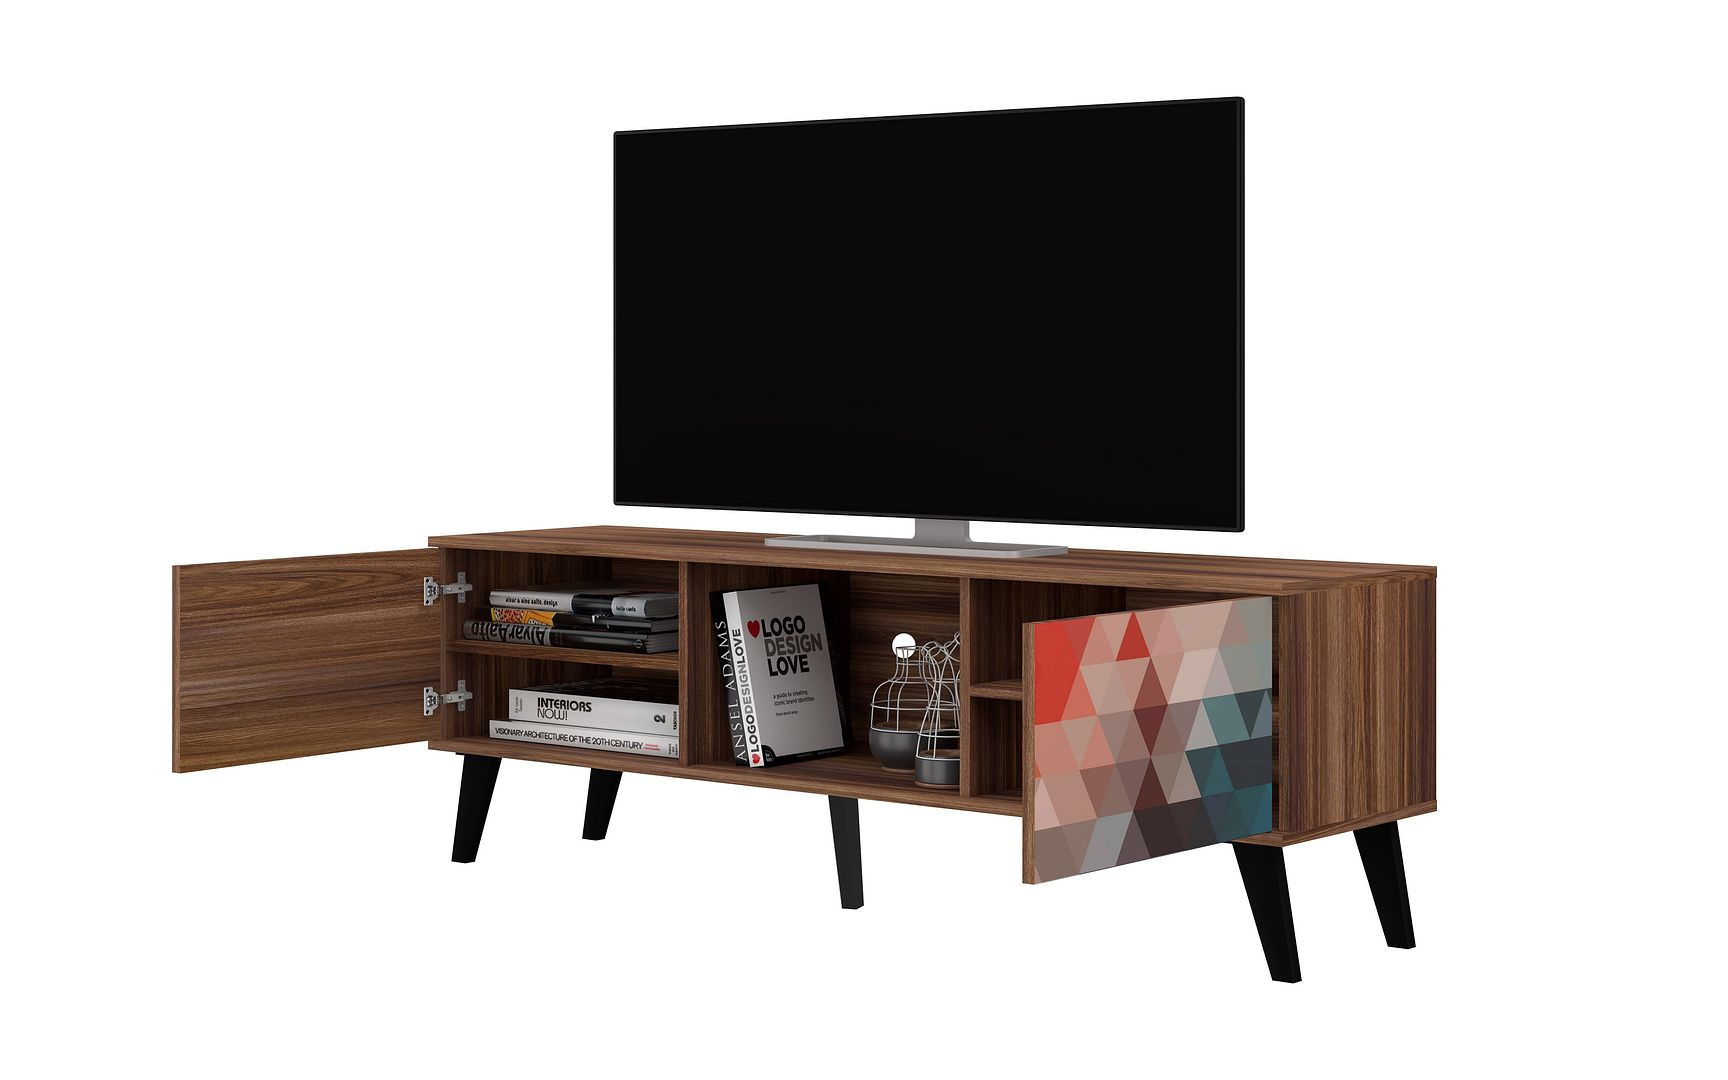 Doyers 70.87 Mid-Century Modern TV Stand in Multi Color Red and Blue